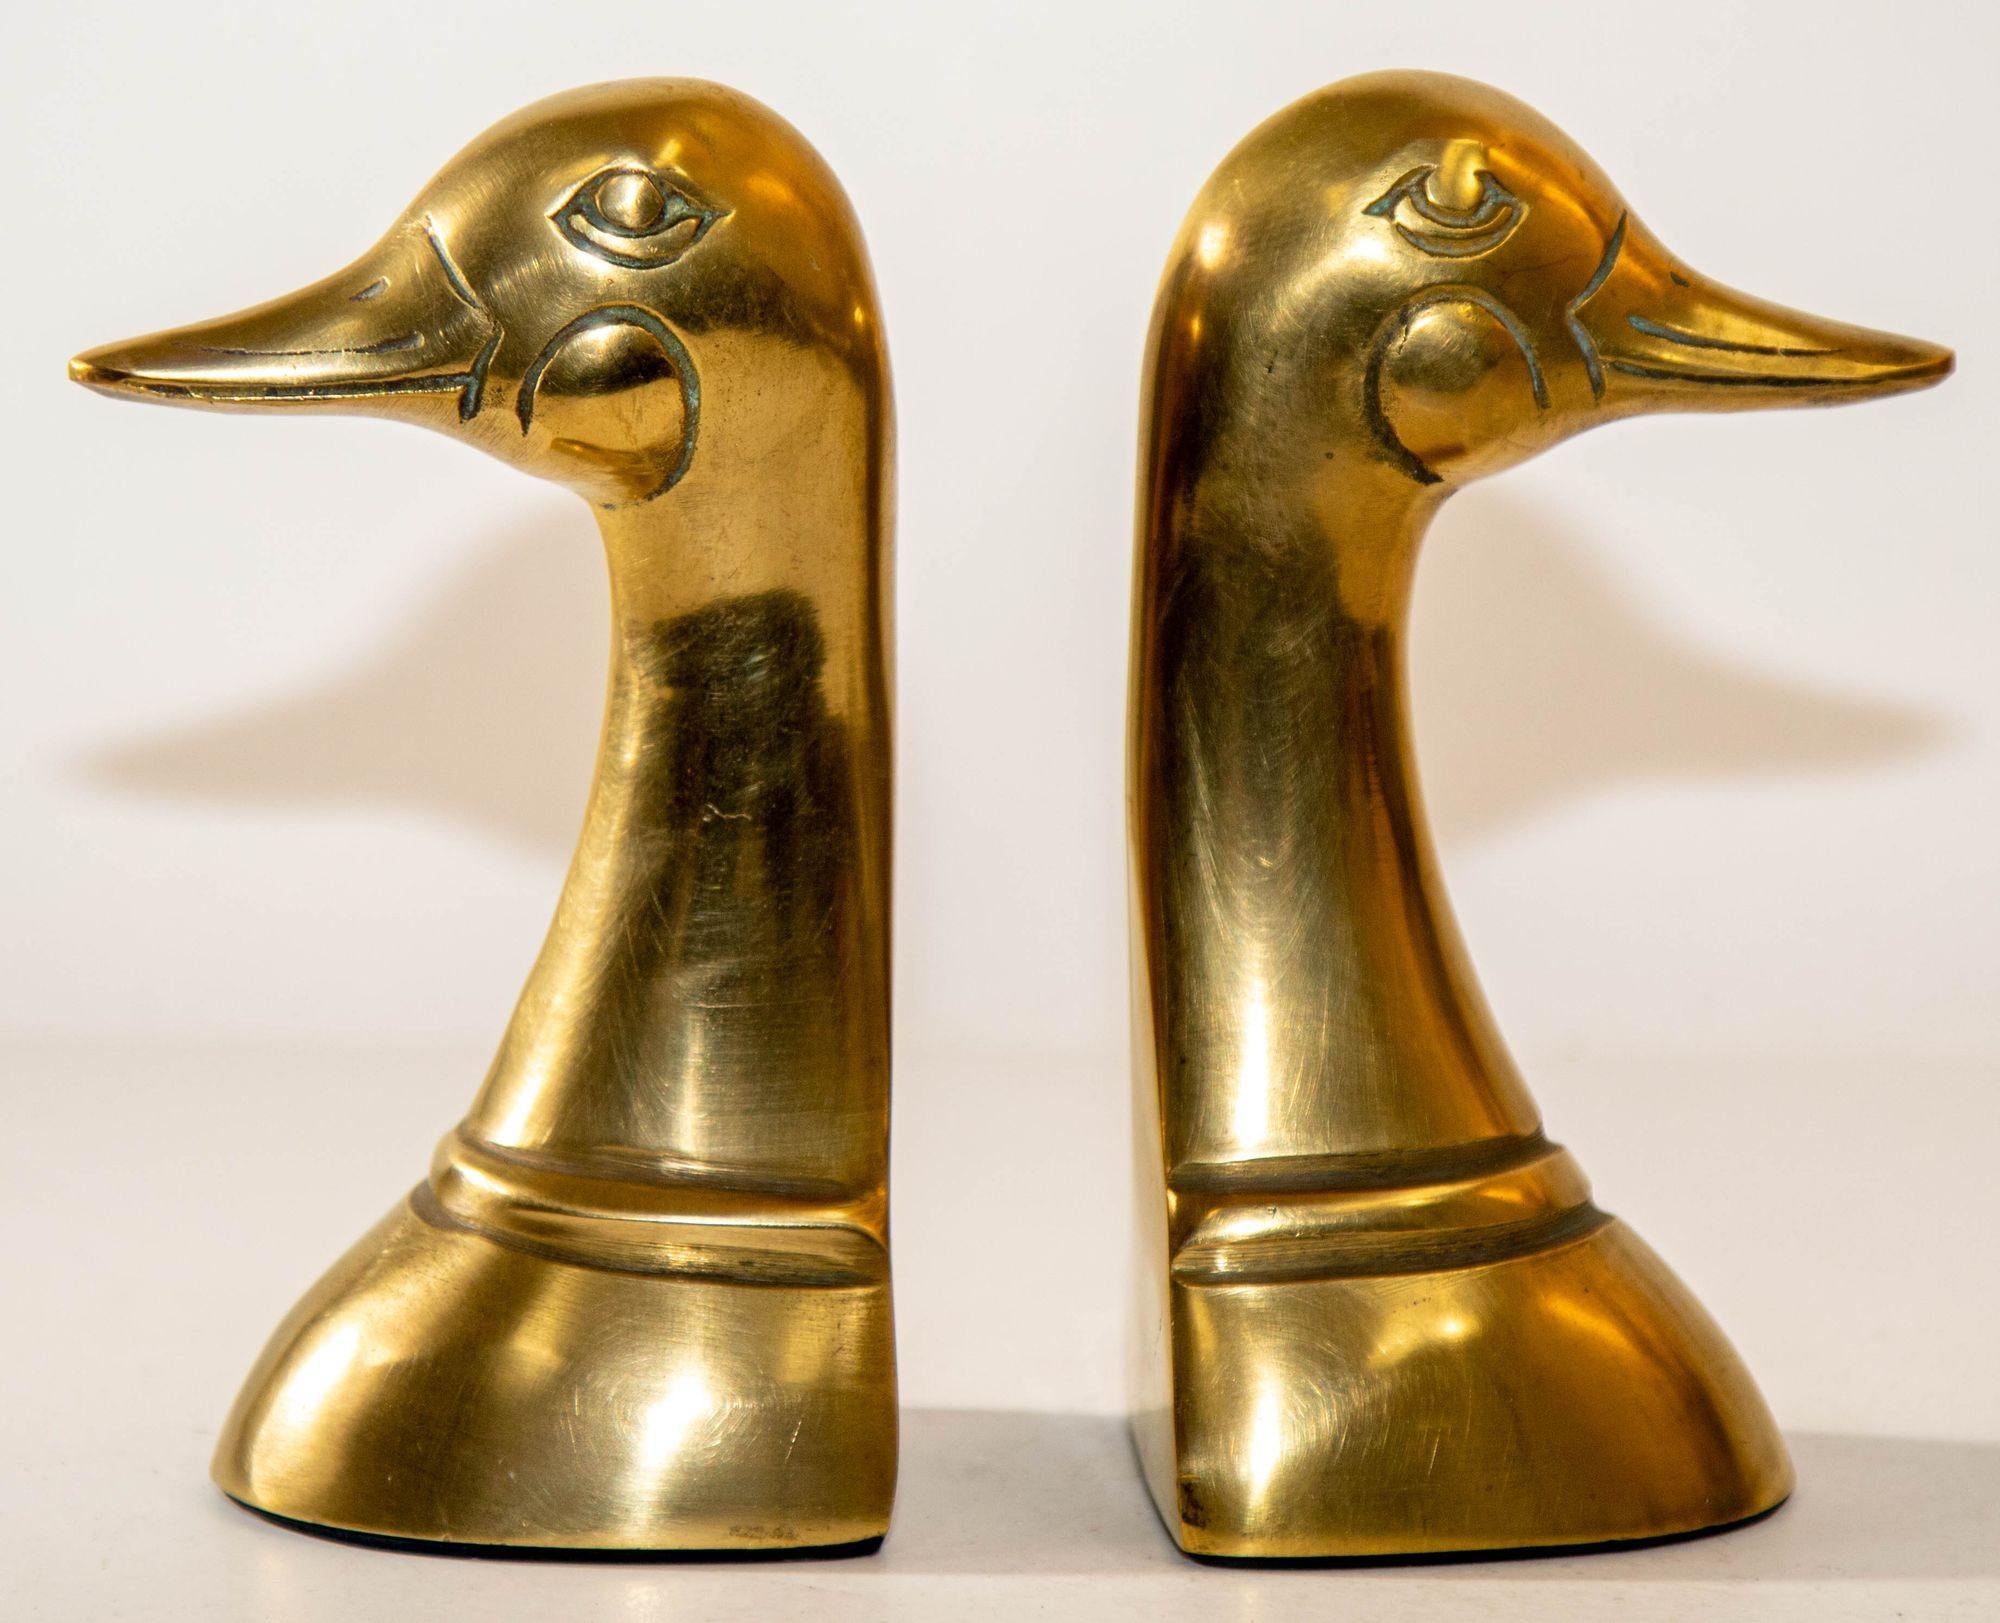 Polished Brass Duck Bookends Sarreid Ltd Style 1950's A Pair.
Vintage pair of polished cast solid brass duck head bookends.
Pair of Mid-Century Modern polished decorative brass Duck Mallard Head Bookends in Sarried style.
Very sturdy and heavy.
Pair